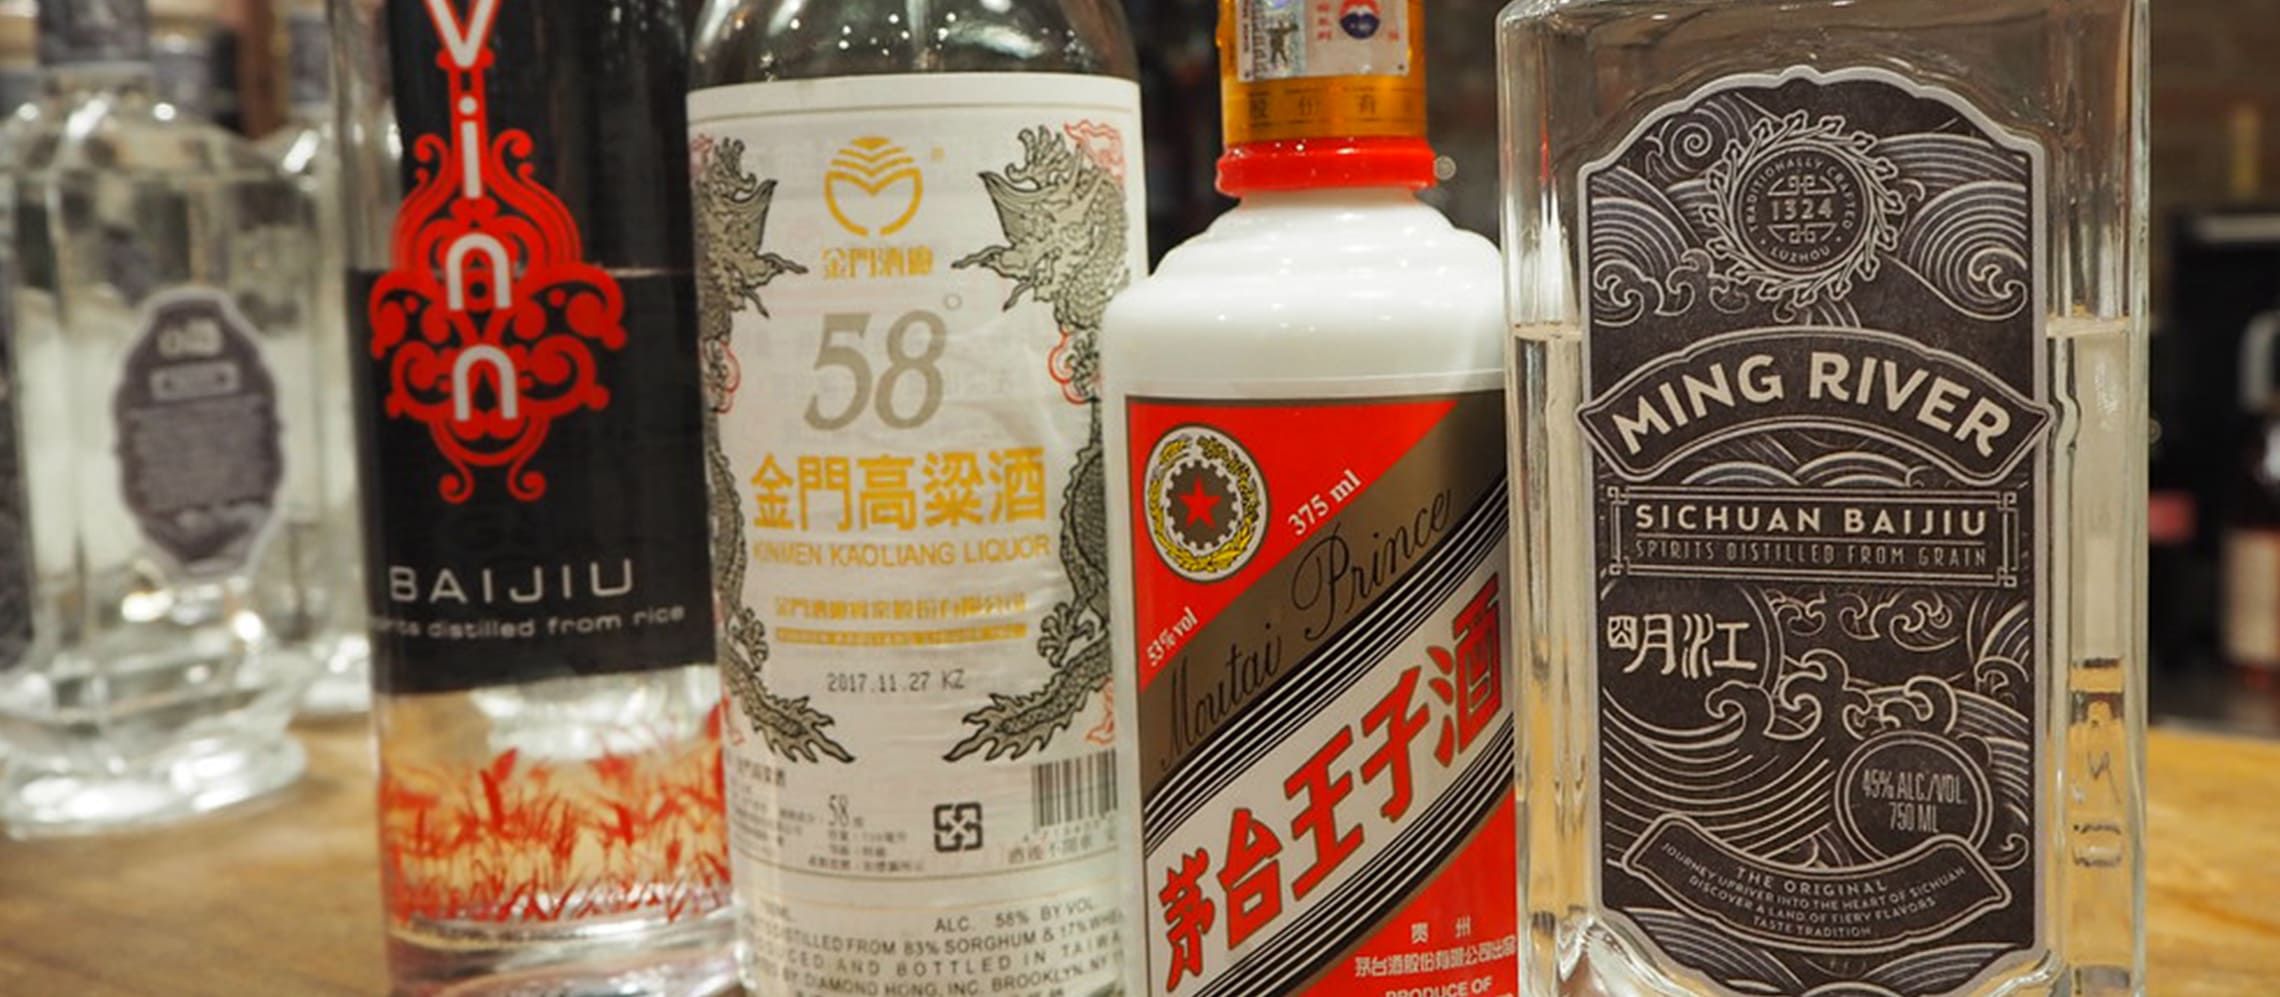 Photo for: Baijiu - The Most Commonly Consumed Spirit in the World!